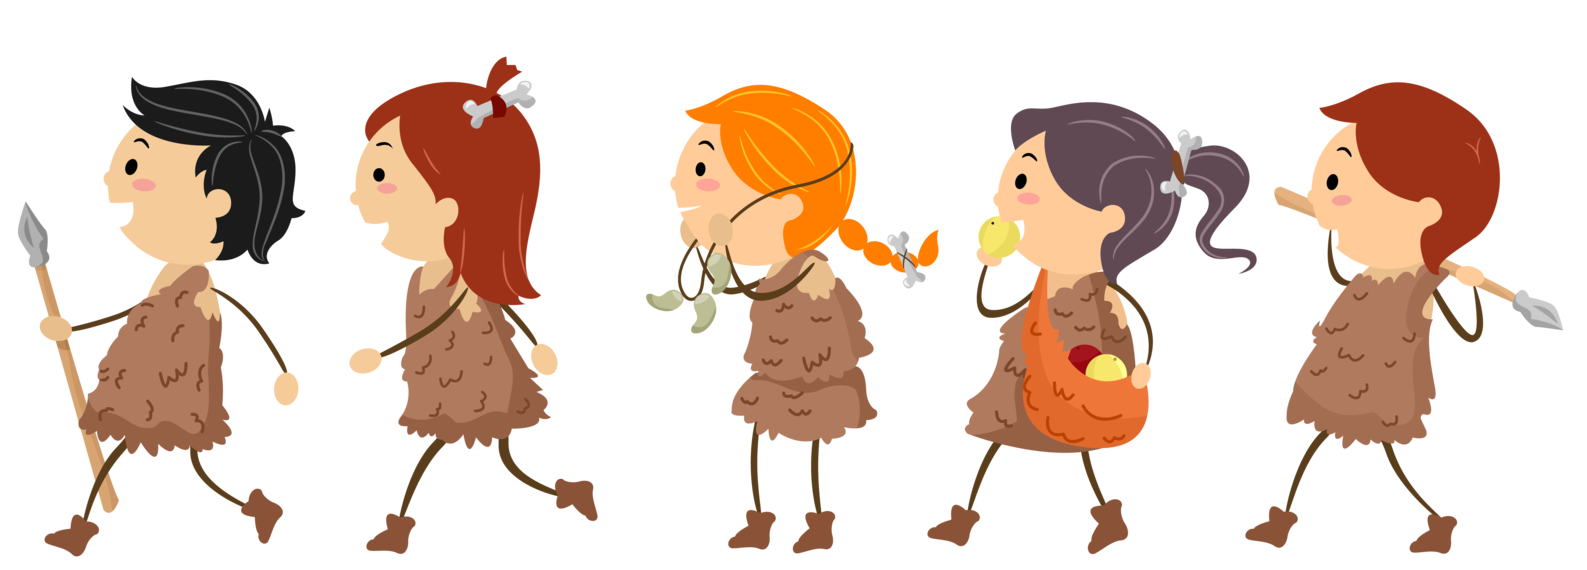 Stone Age for kids, Neolithic People PNG - Free PNG